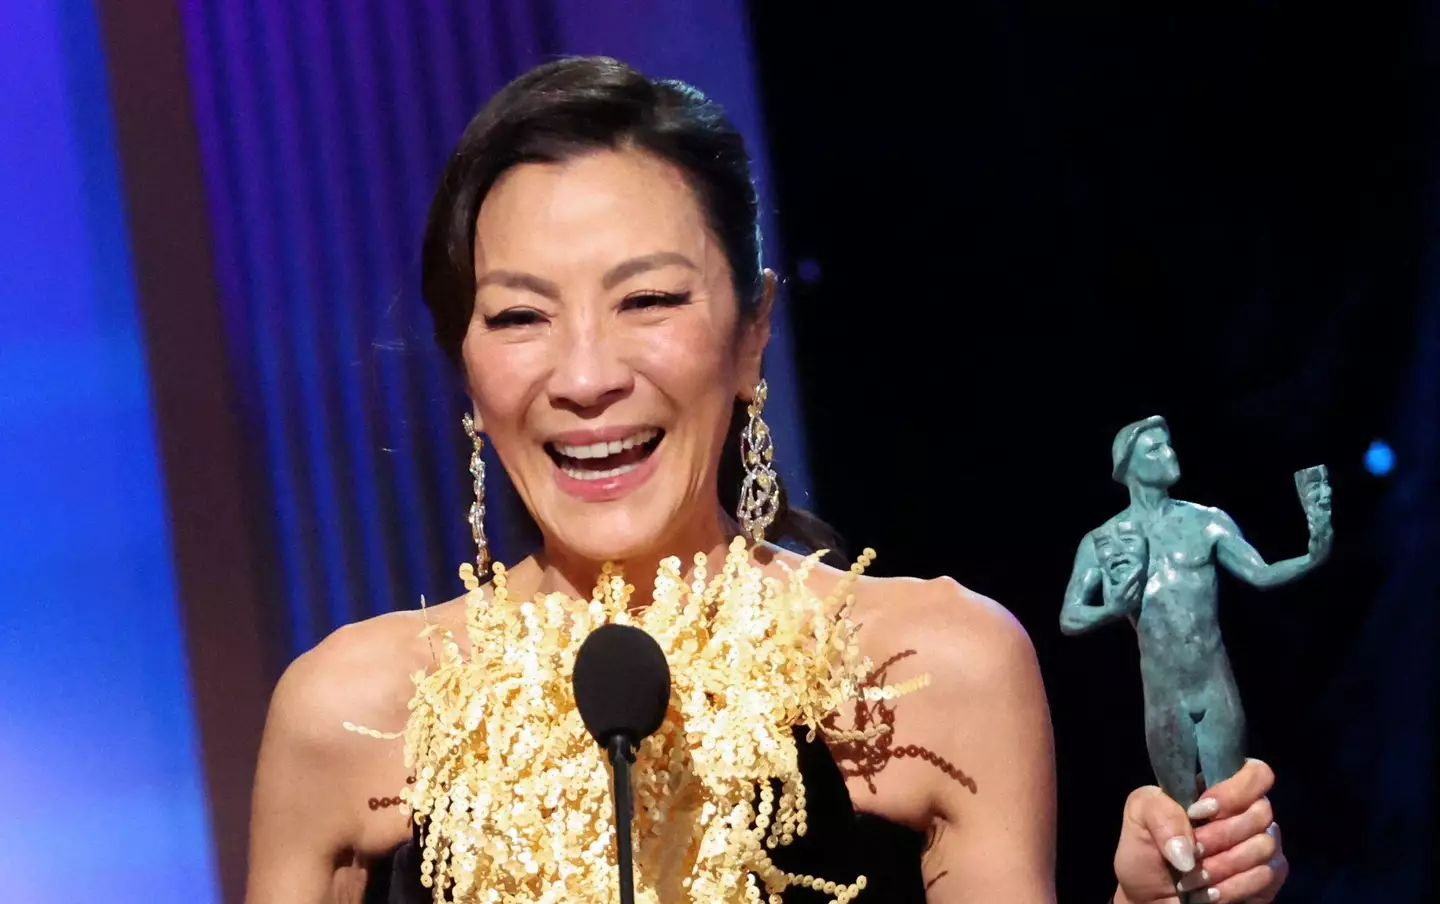 Michelle Yeoh won the gong for Female Actor in a Leading Role at the SAG Awards.